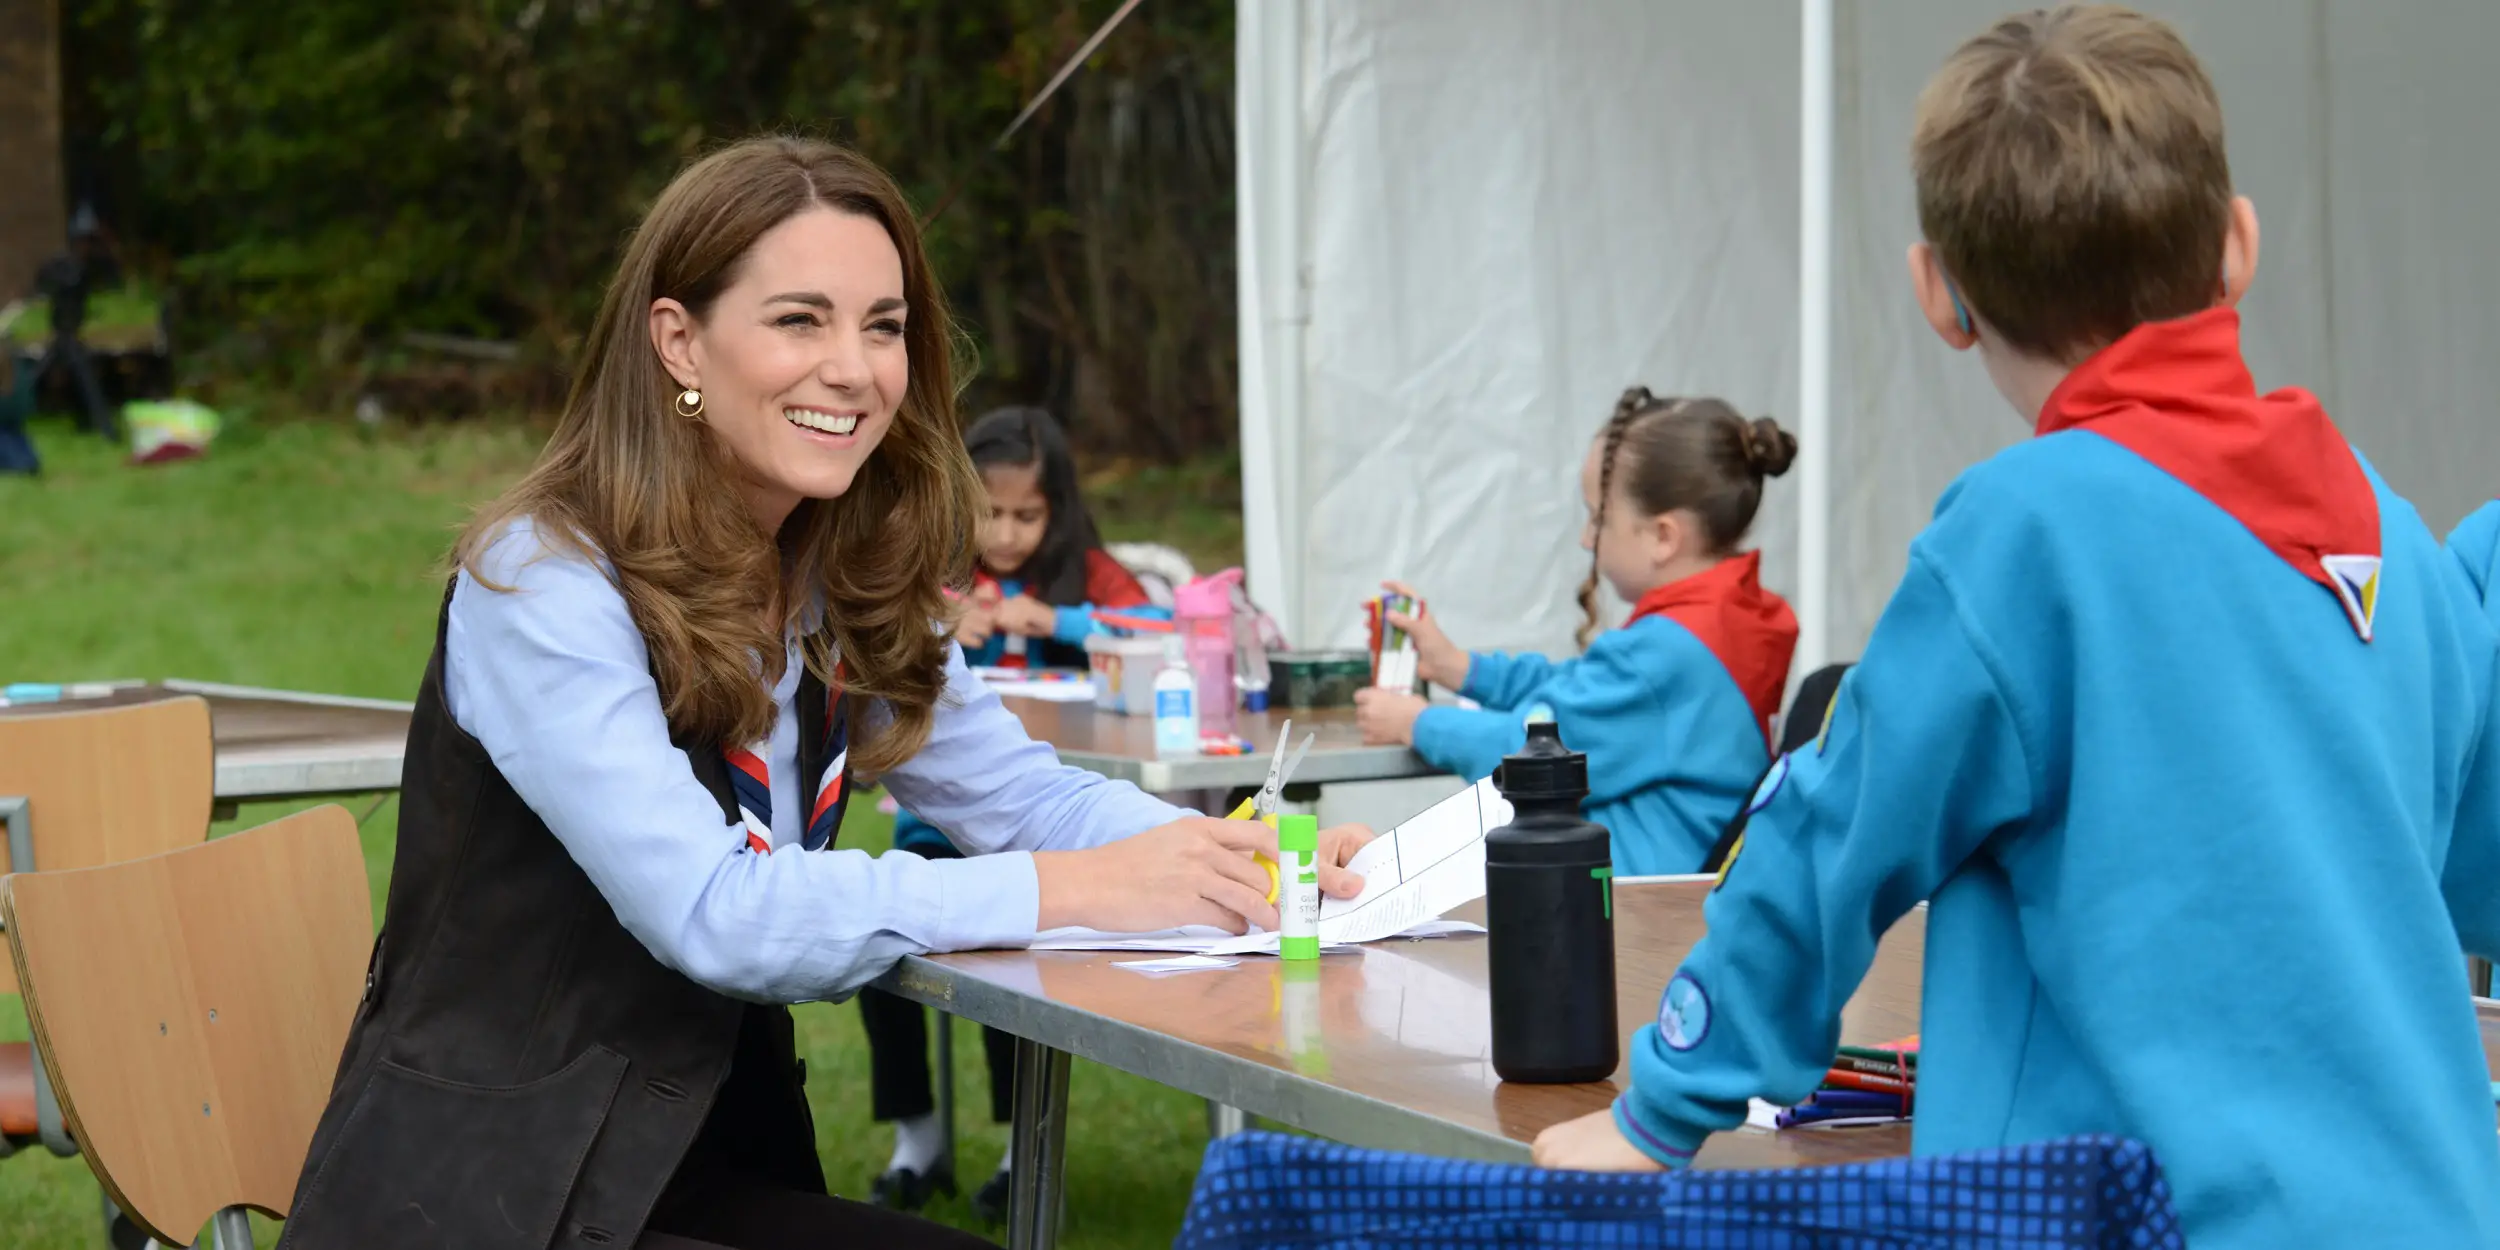 The Duchess of Cambridge wore Massimo Dutti Sky Blue Plain 100% Linen Shirt in September 2020 to visit scouts